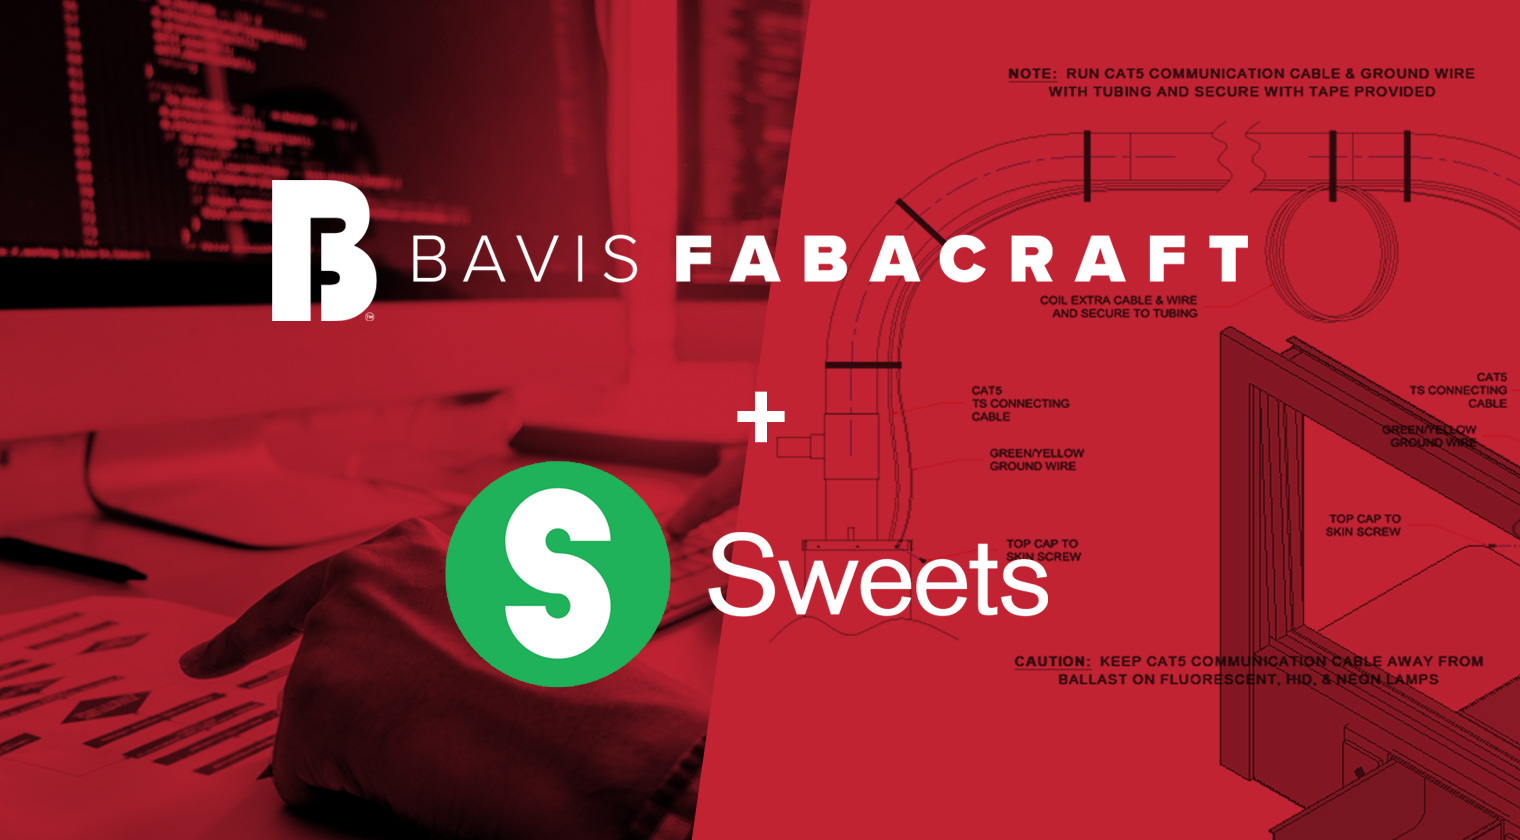 Bavis Fabacraft partners with Sweets